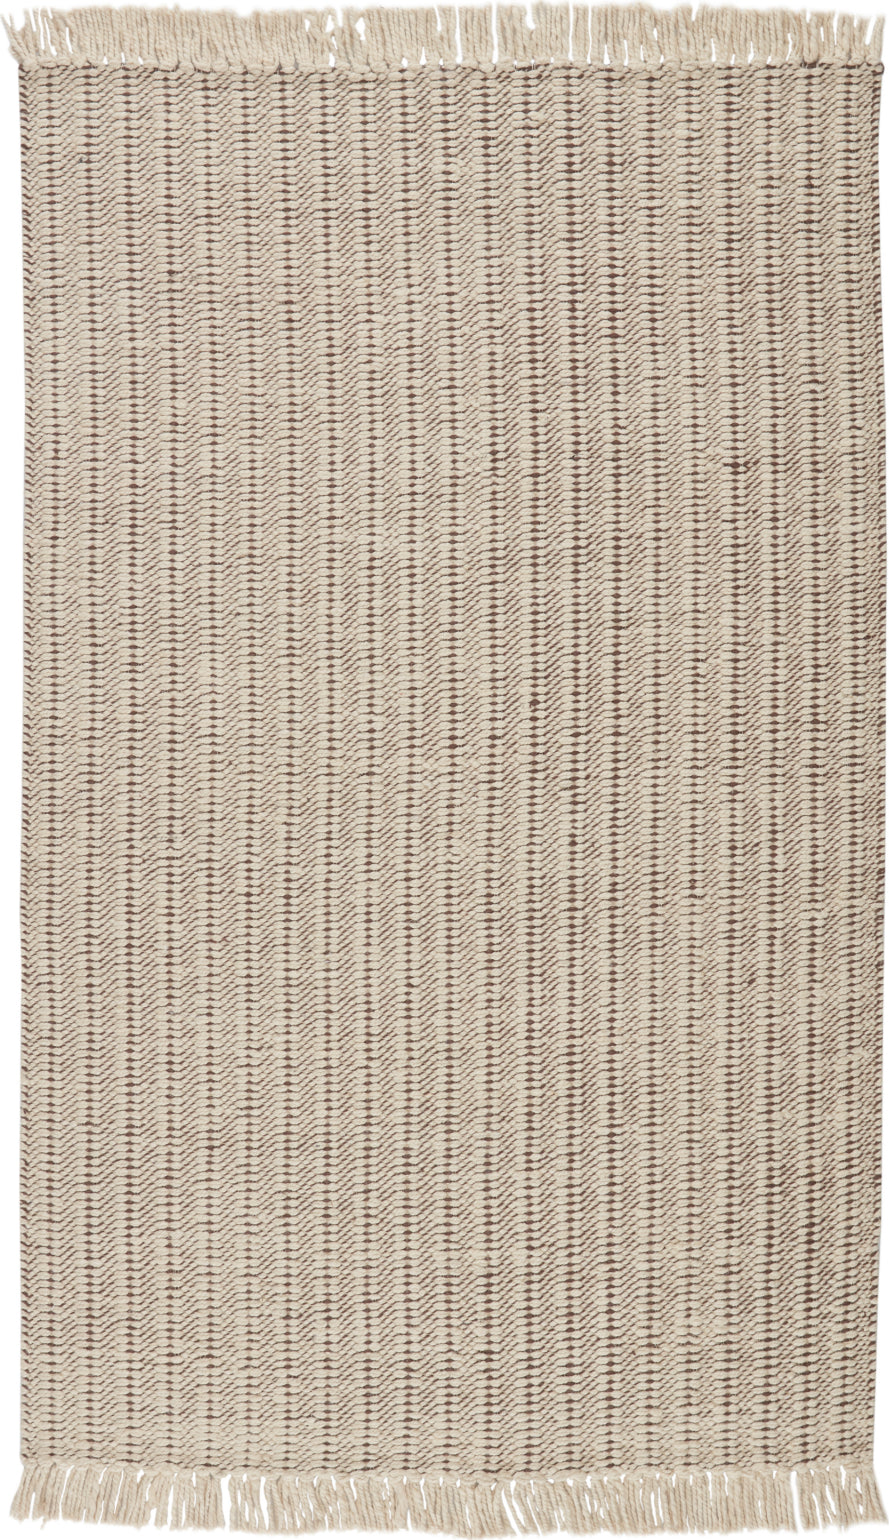 Jaipur Living Morning Mantra Poise MMR02 Cream/Taupe Area Rug - Top Down